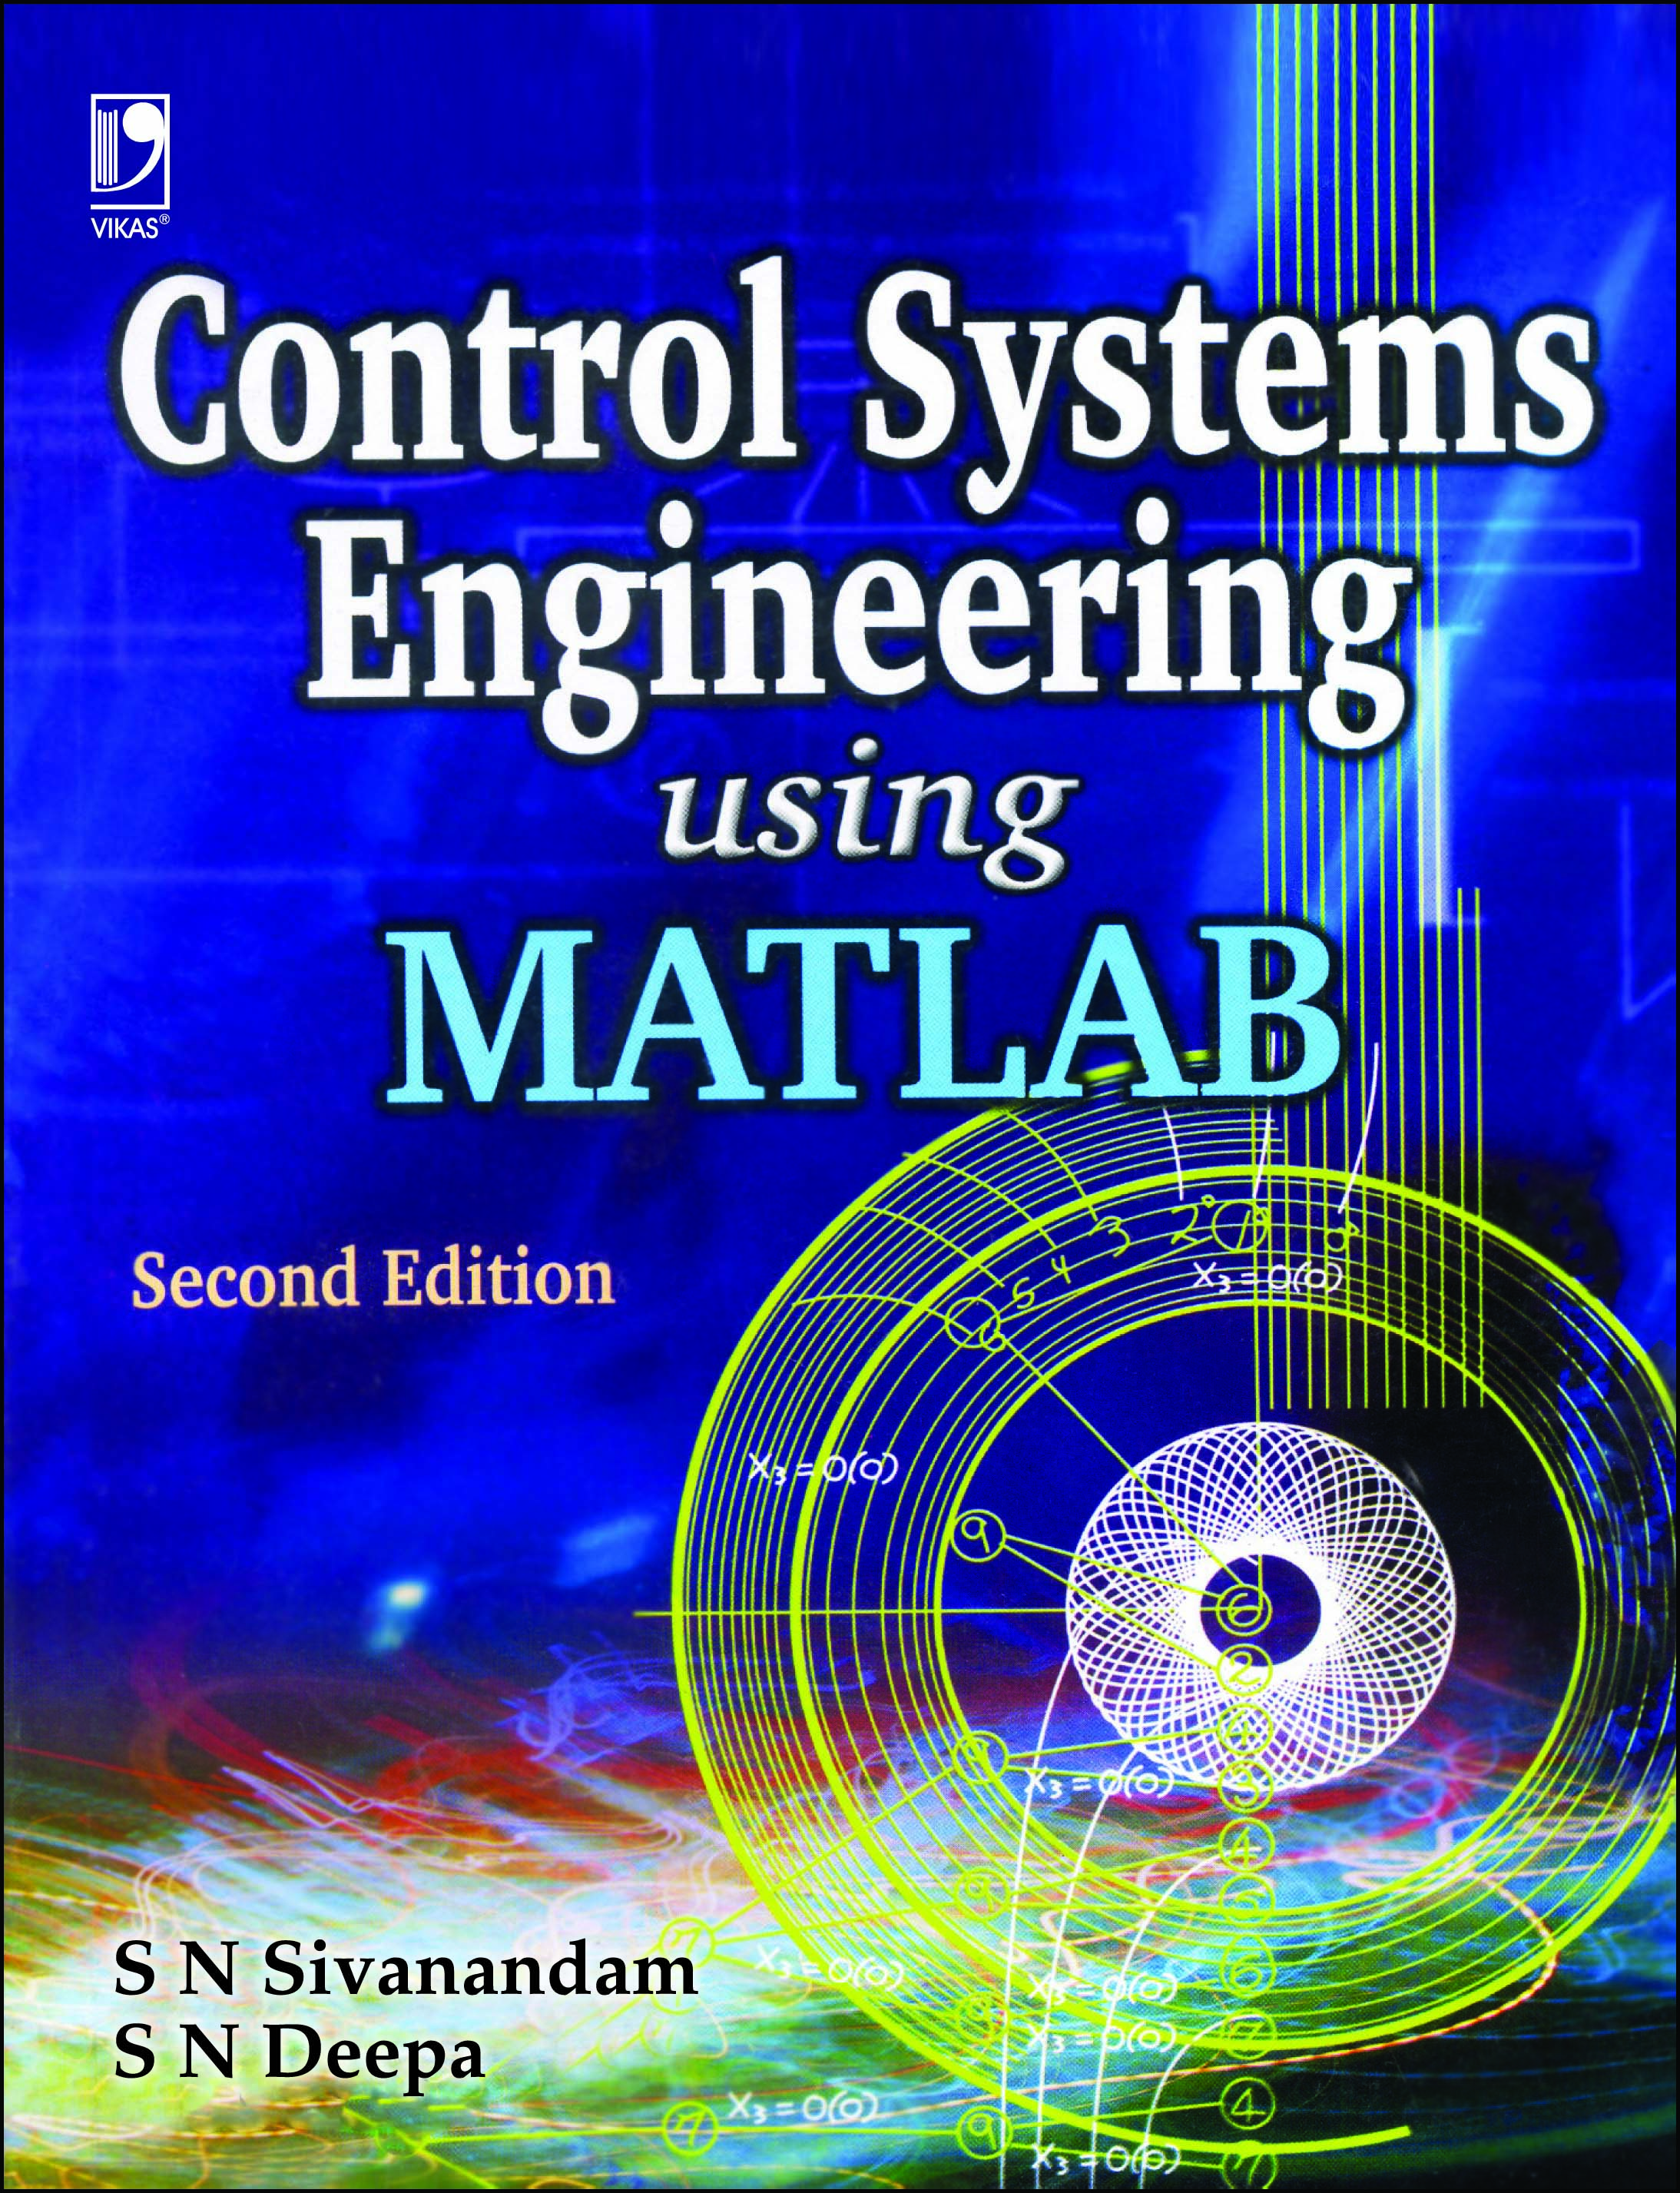 Control Systems Engineering Using MATLAB